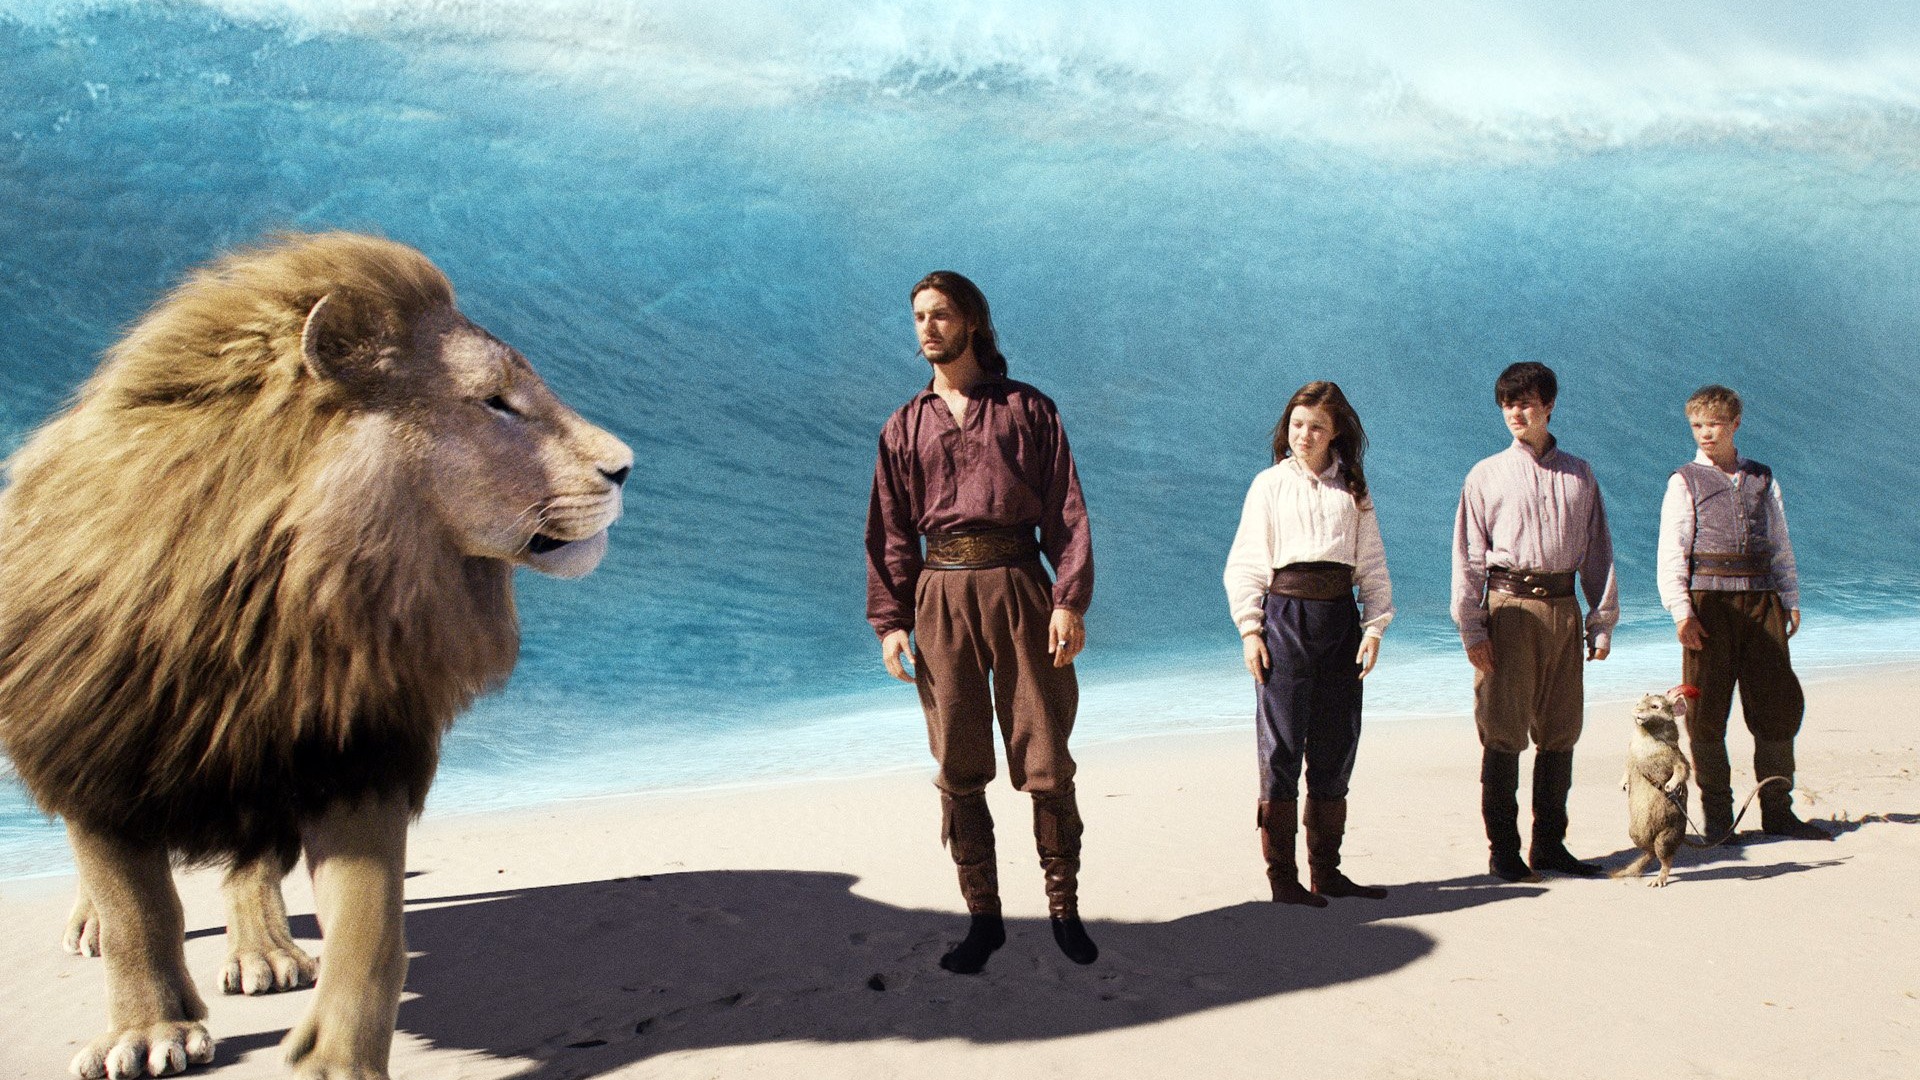 The Chronicles of Narnia: The Voyage of the Dawn Treader wallpapers #6 - 1920x1080